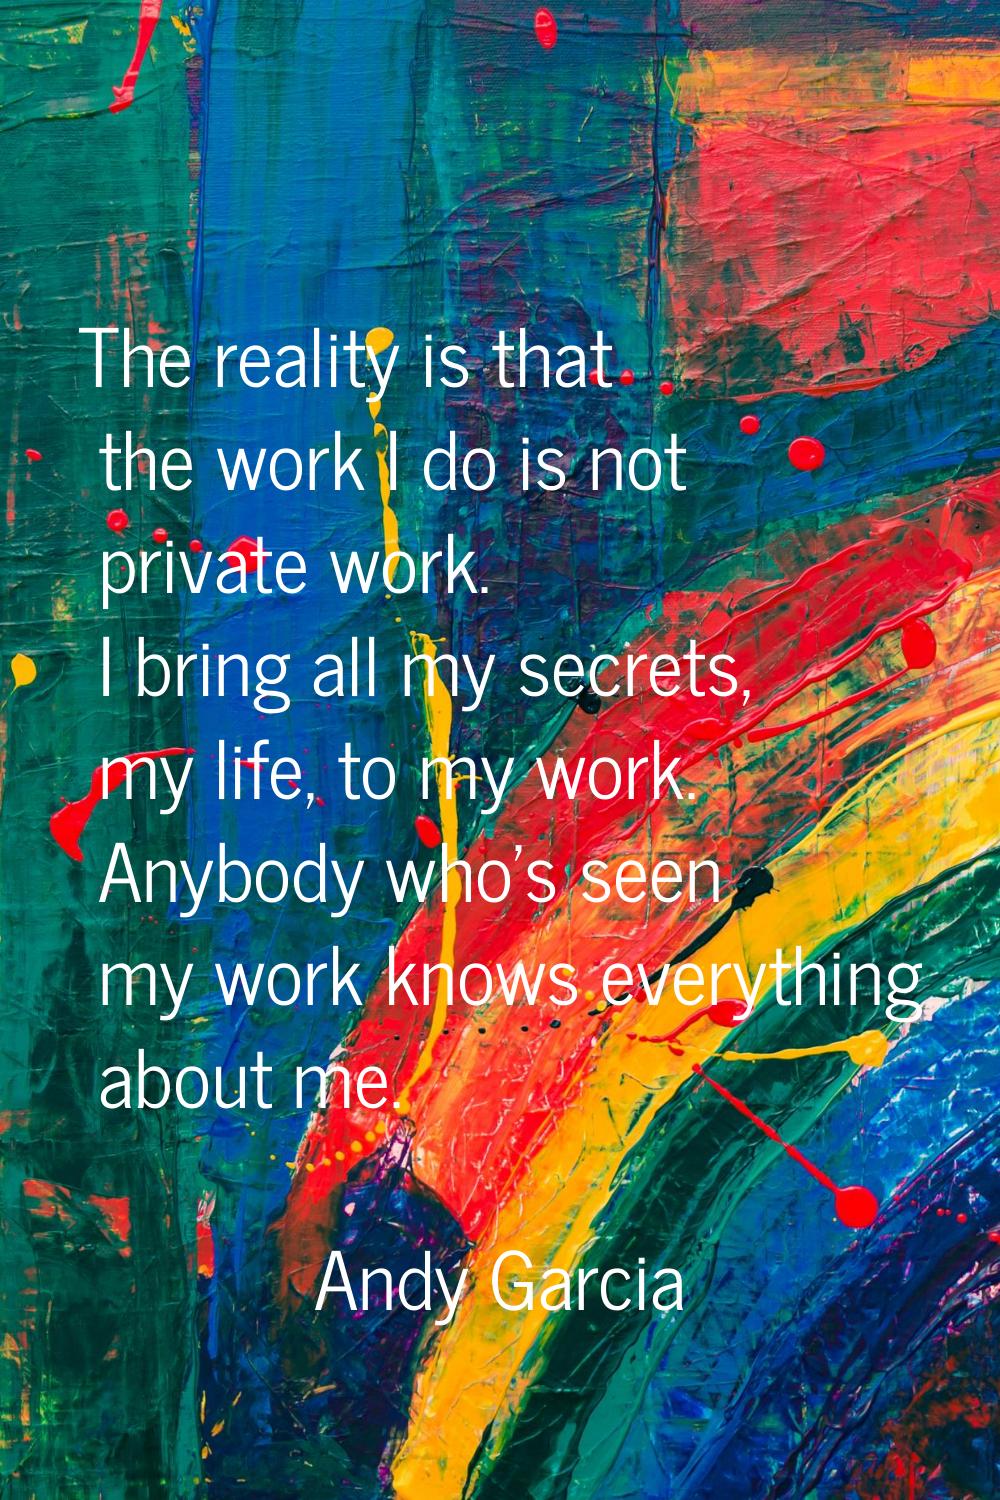 The reality is that the work I do is not private work. I bring all my secrets, my life, to my work.